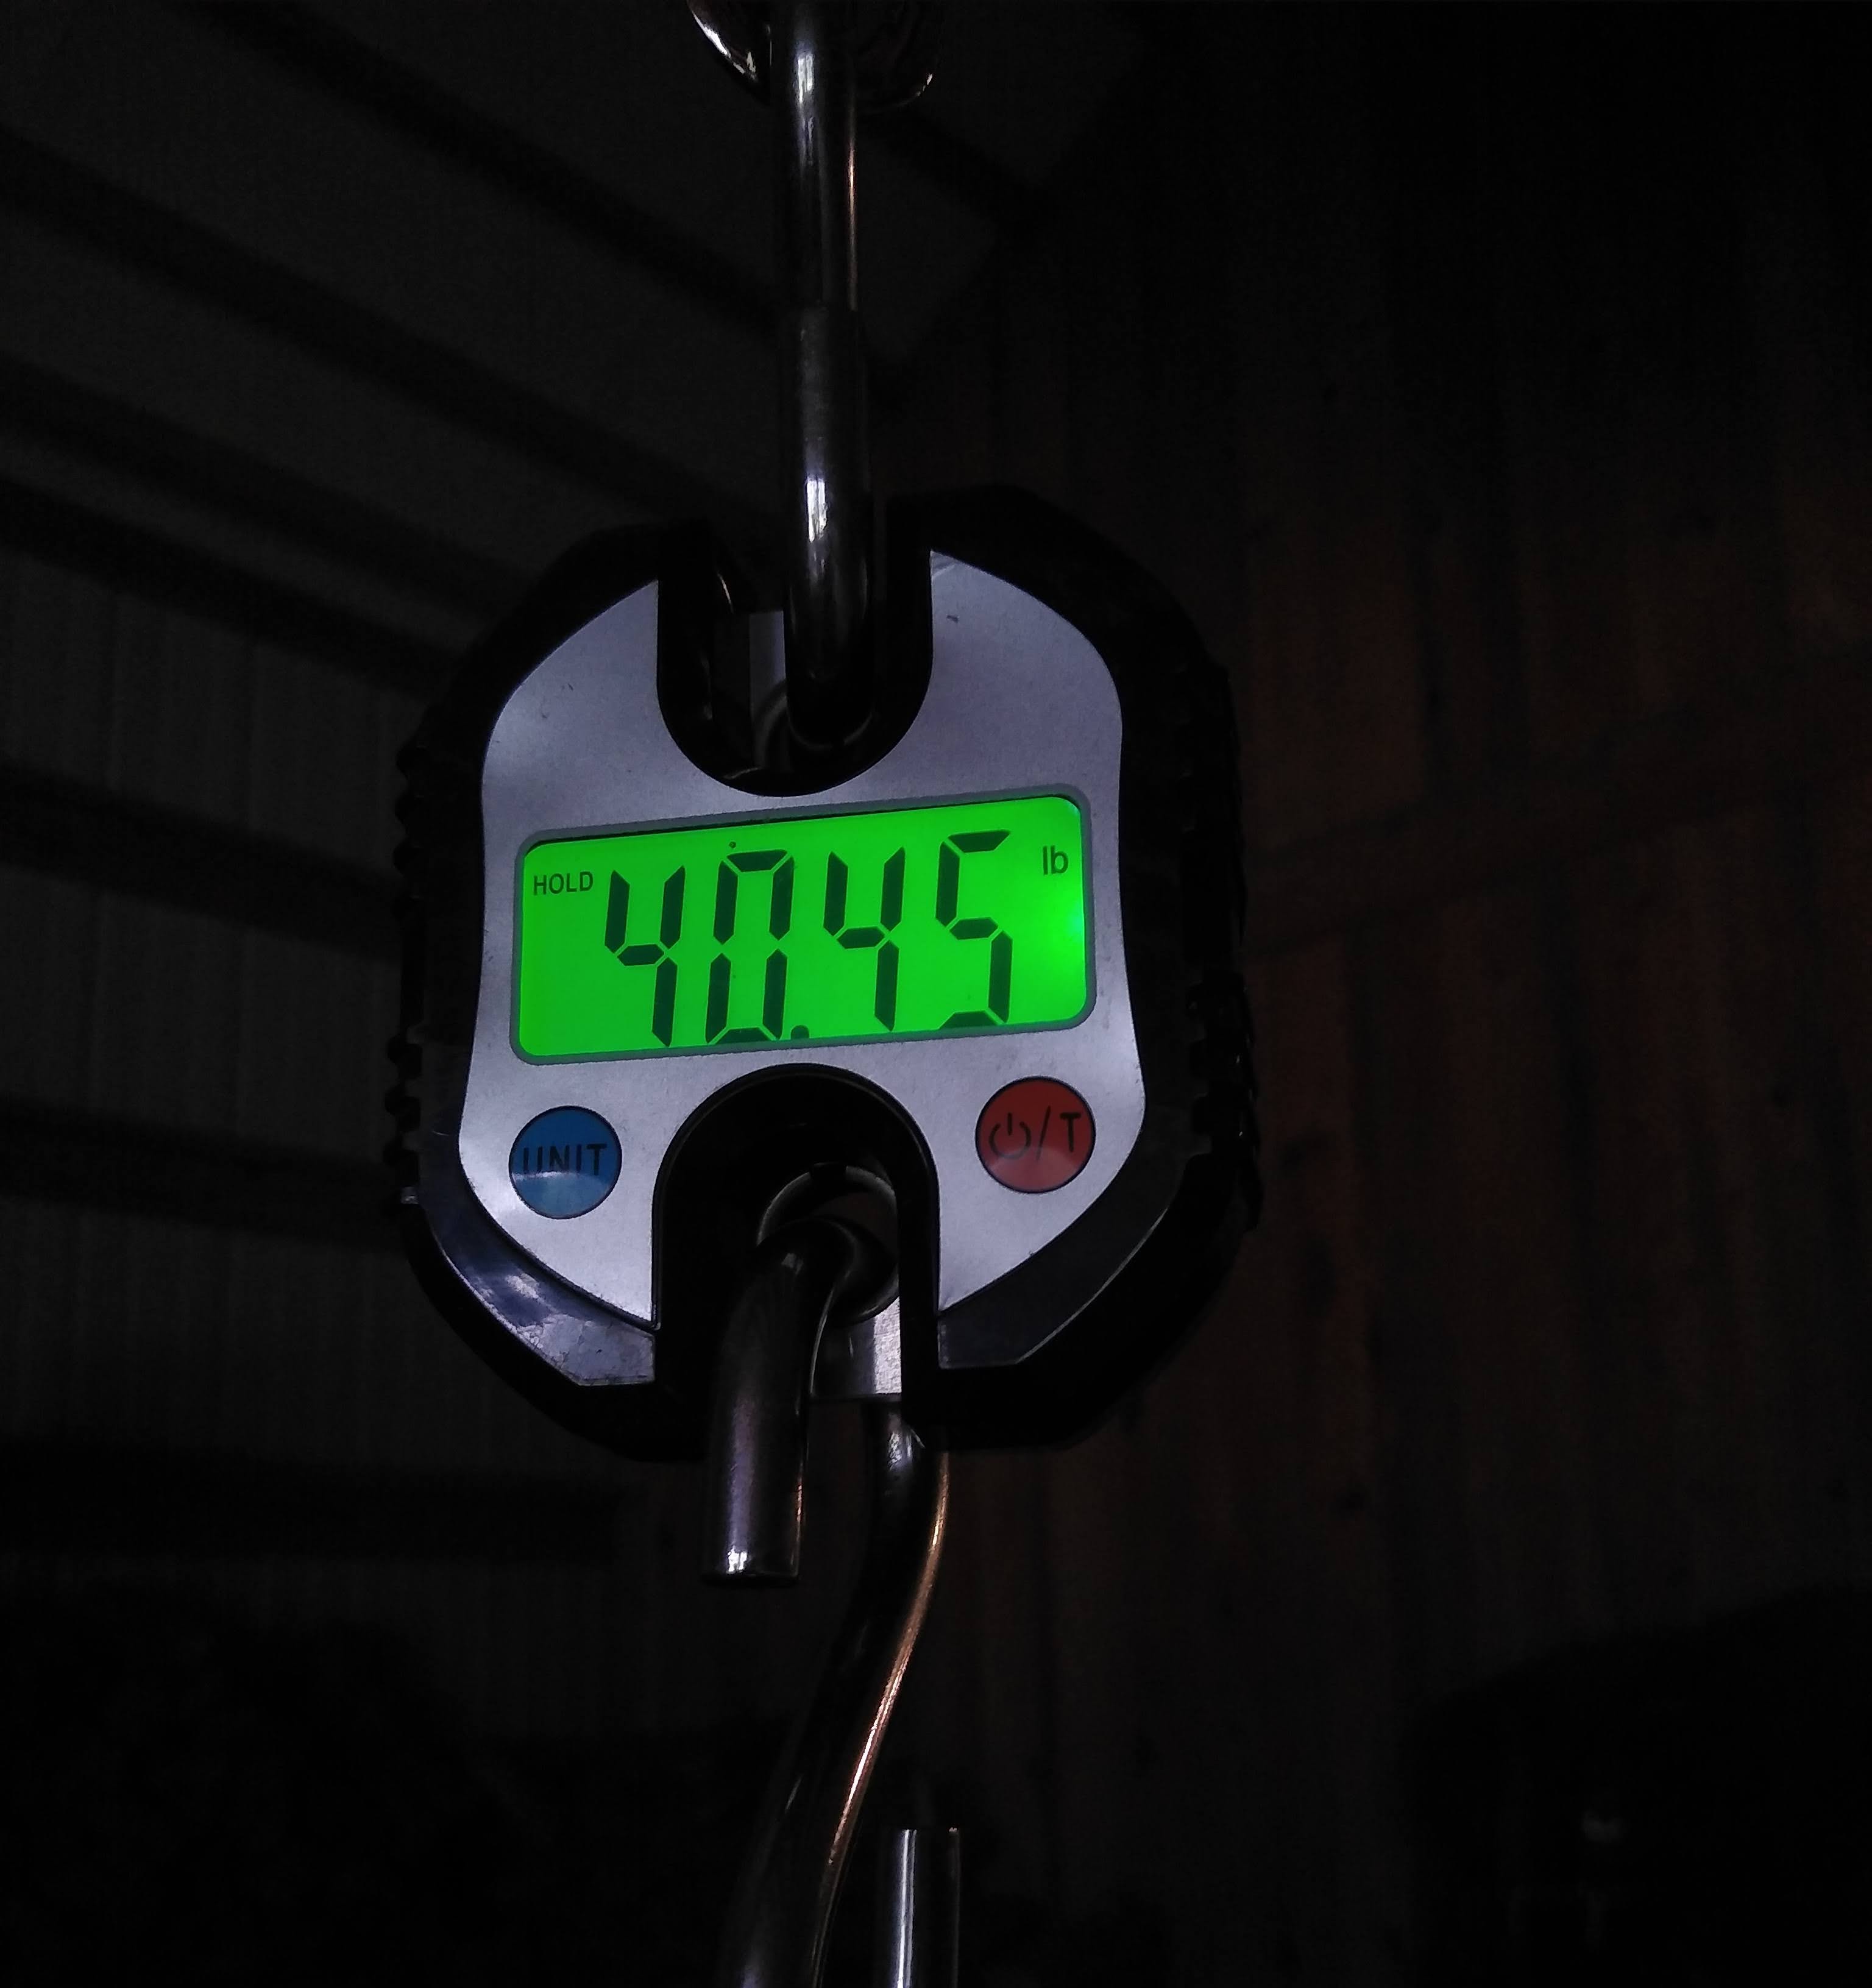 A horse hay scale with lighted green display in a dark barn. The scale display reads 40.45 pounds.